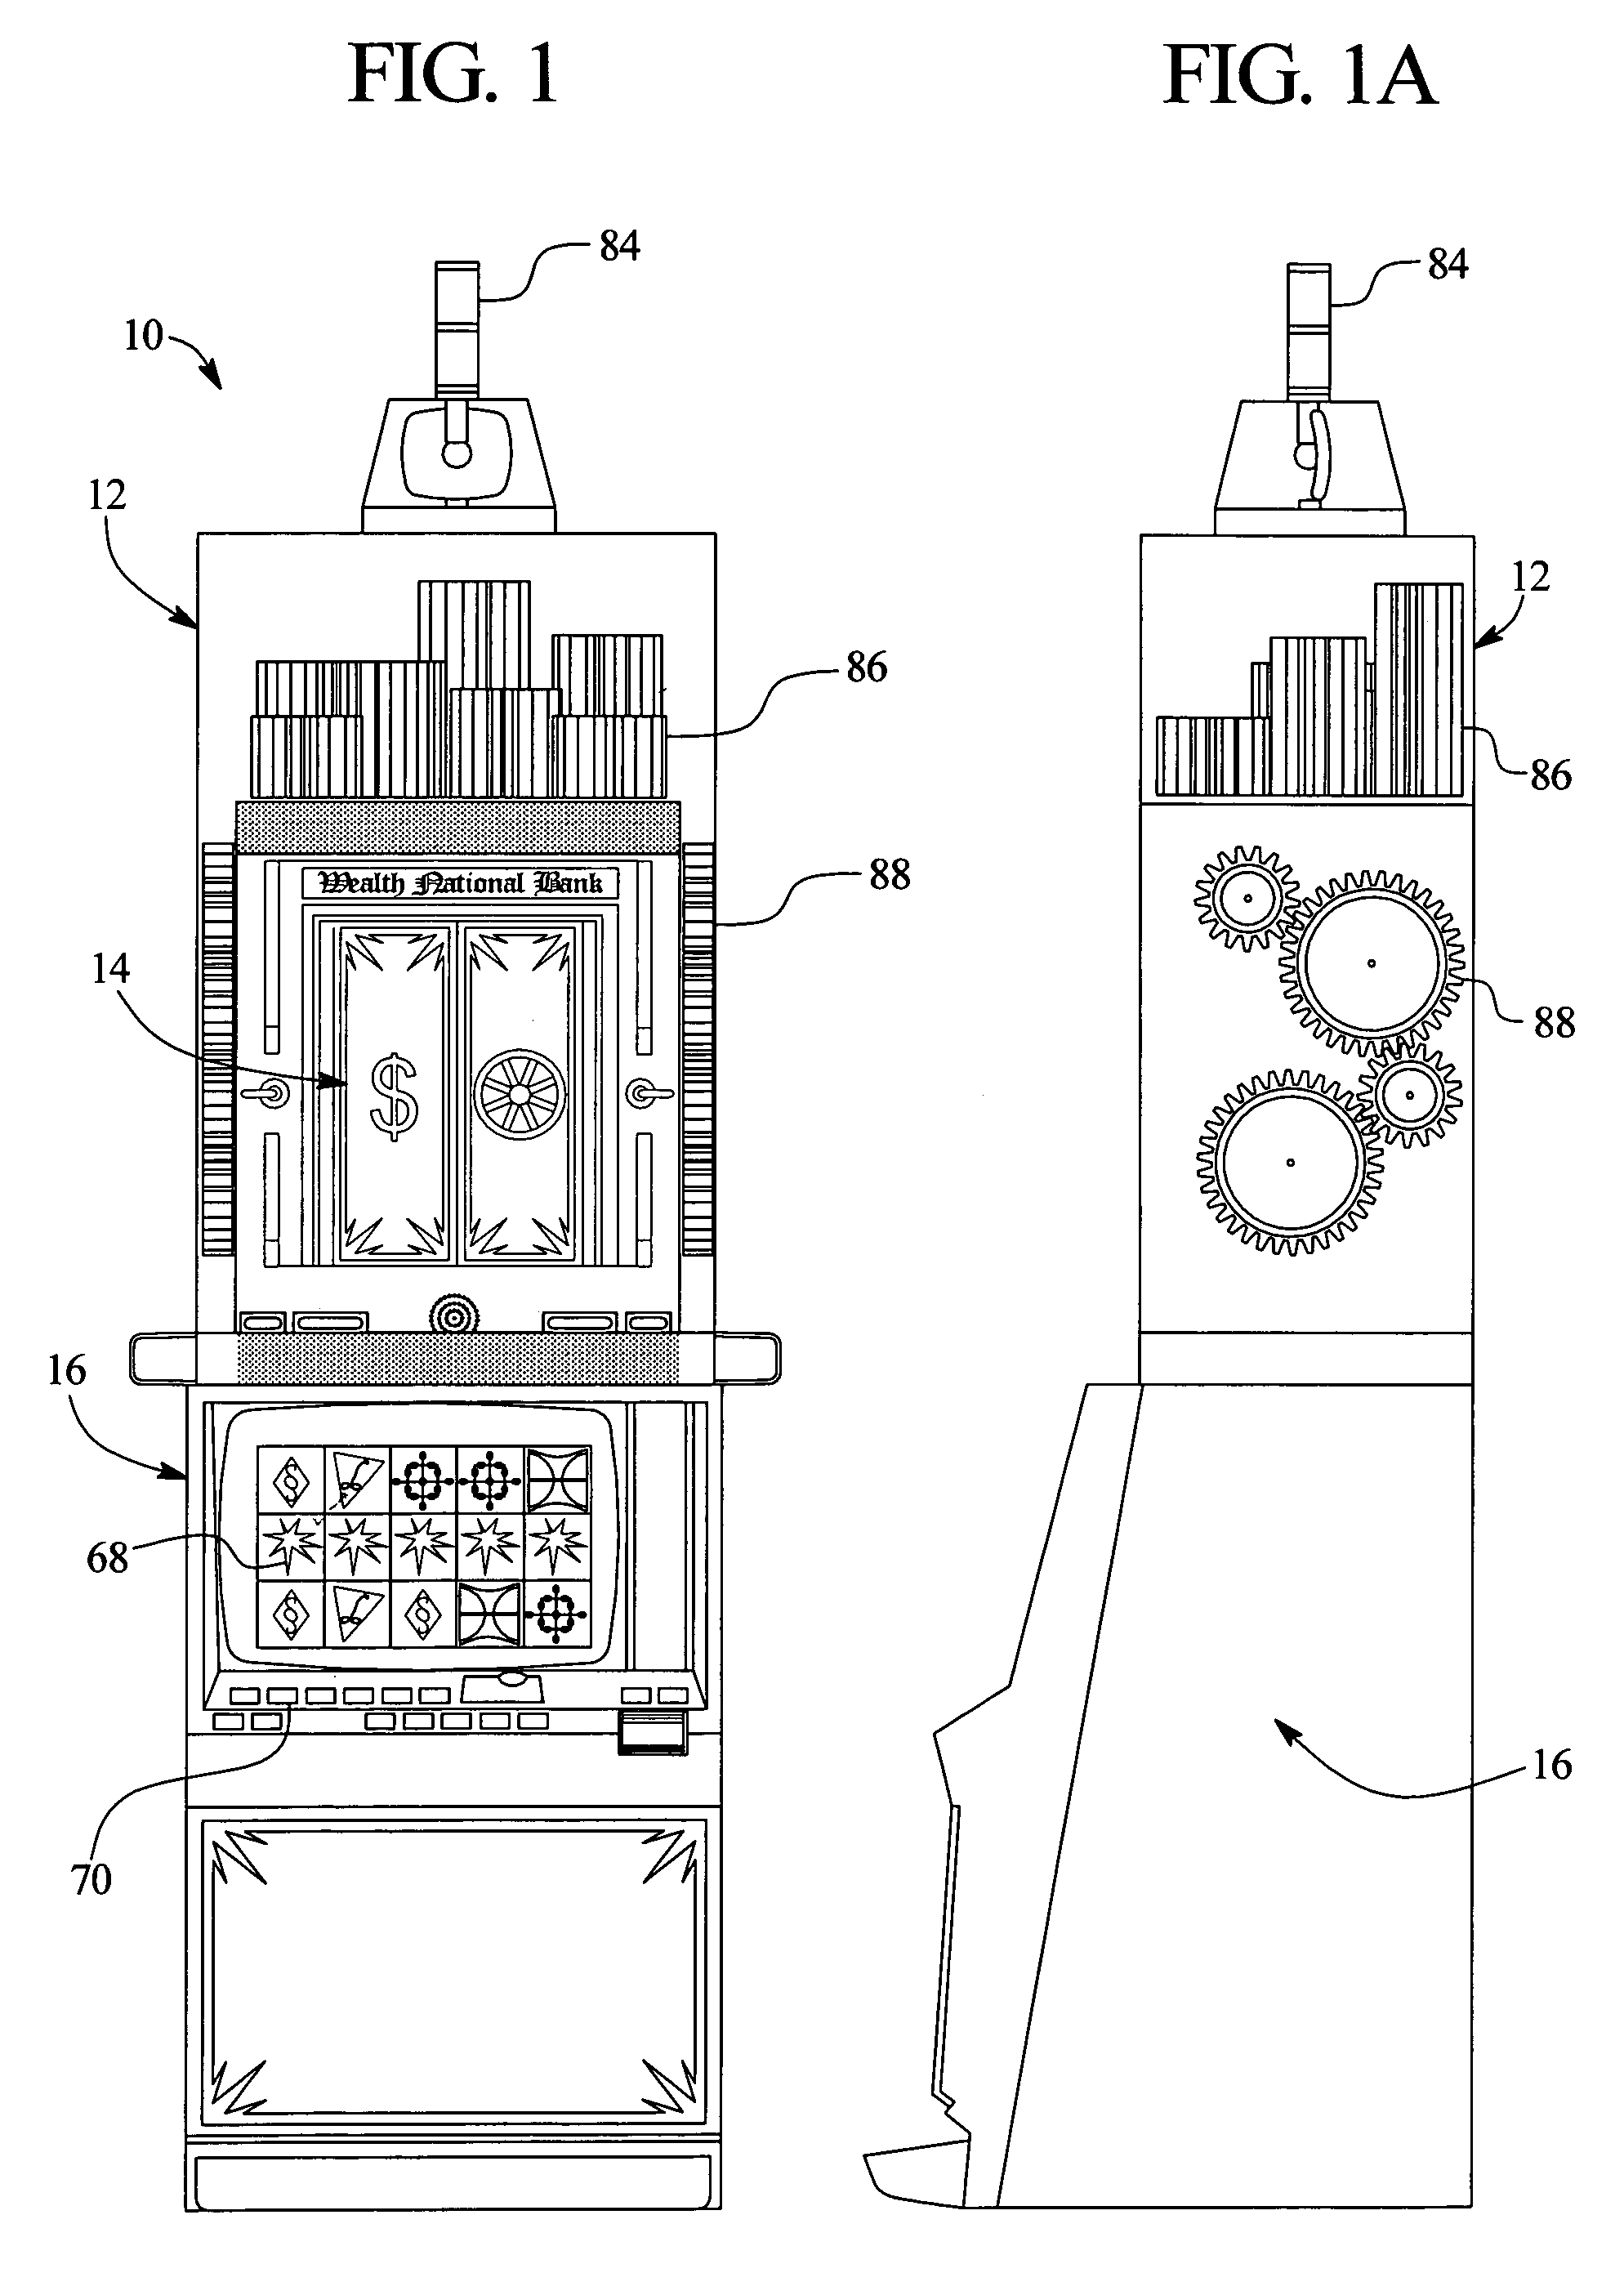 Method and apparatus for a slot machine gaming device simulating a bank robbery